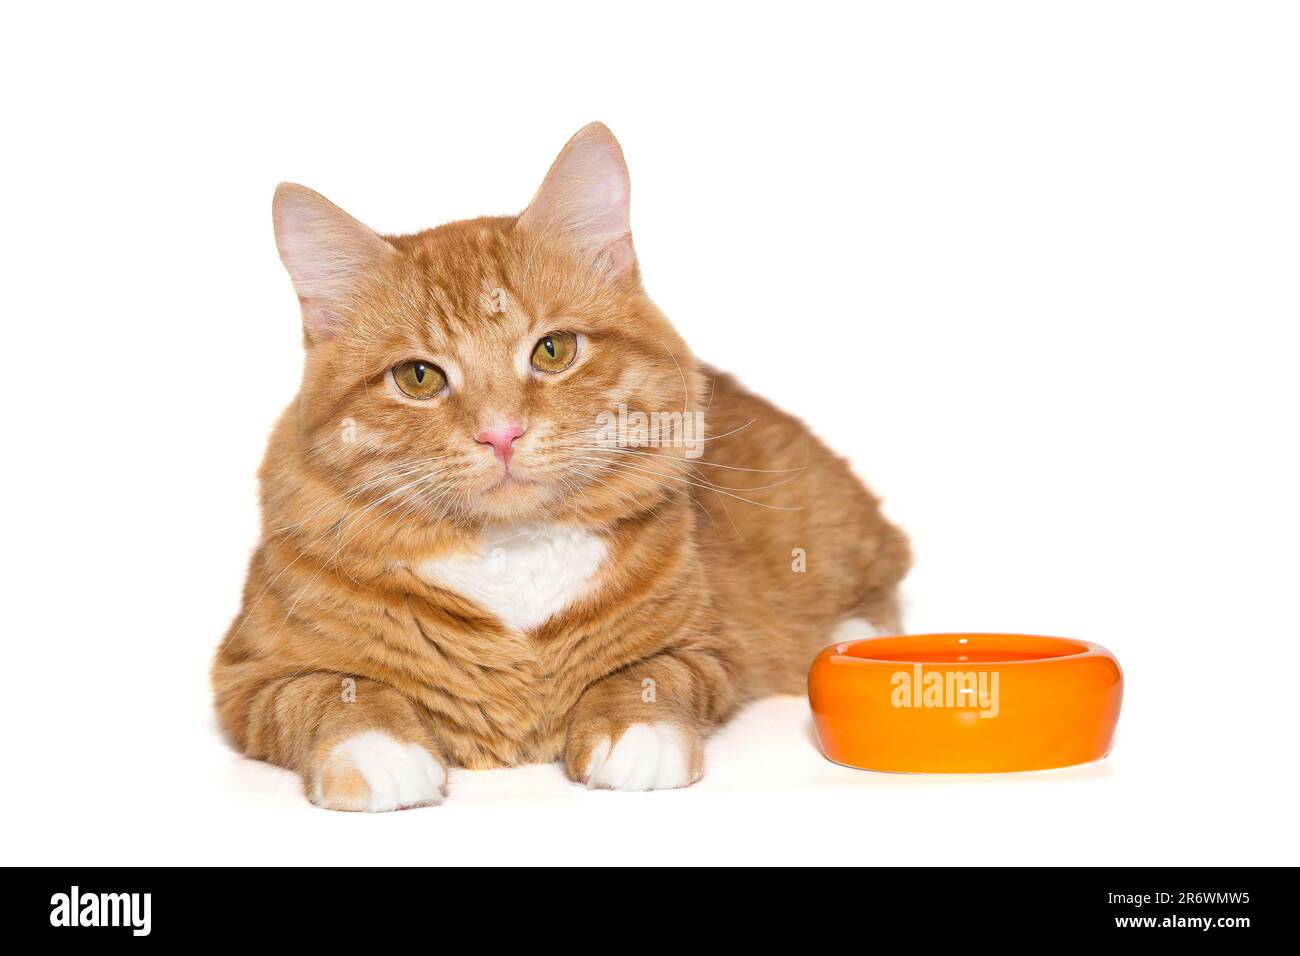 Beautiful ginger cat lies next to an orange bowl, isolated on a white background Stock Photo